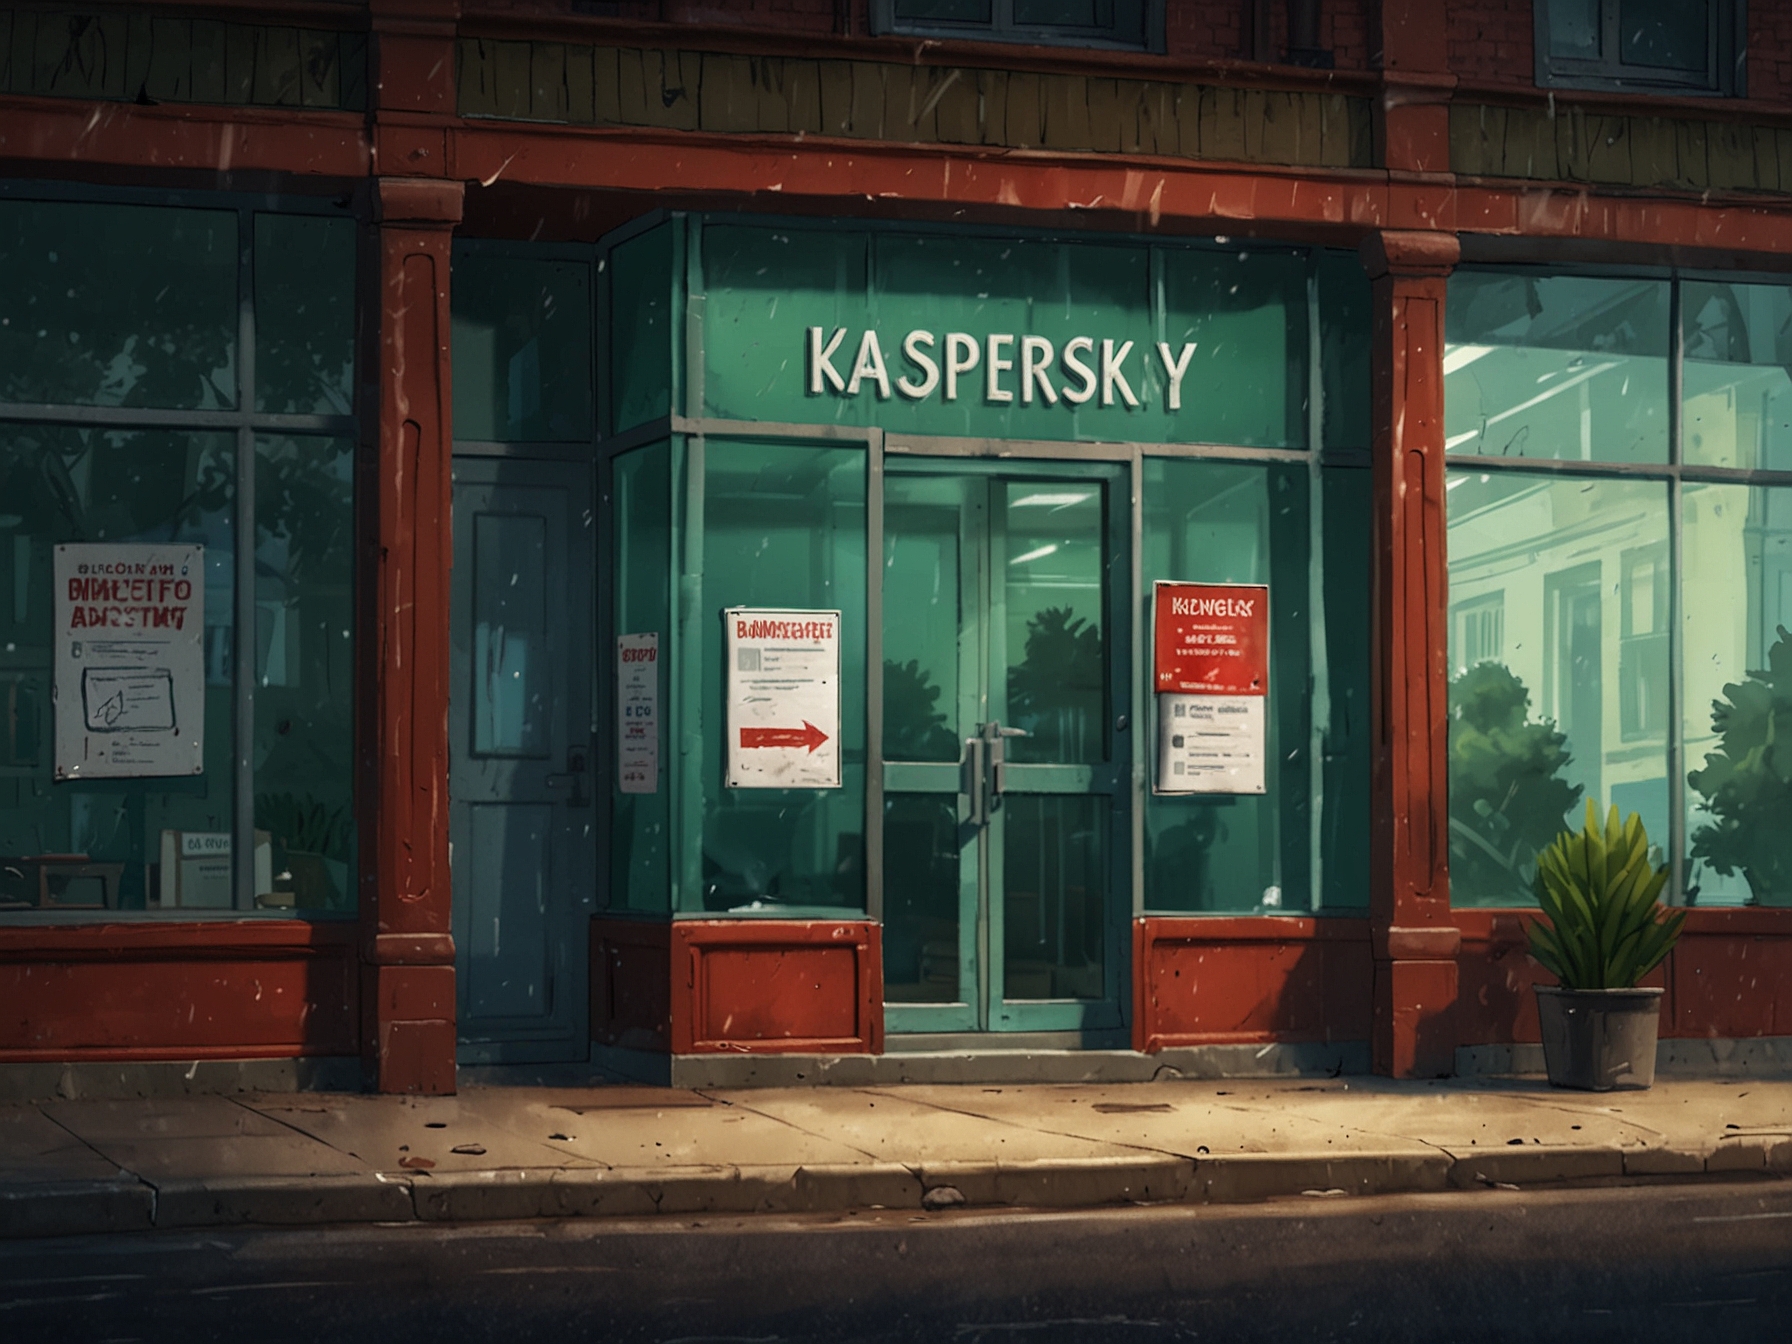 A closed Kaspersky store with a visible 'banned' sign, symbolizing the US government's prohibition on the sale of the software across the country.